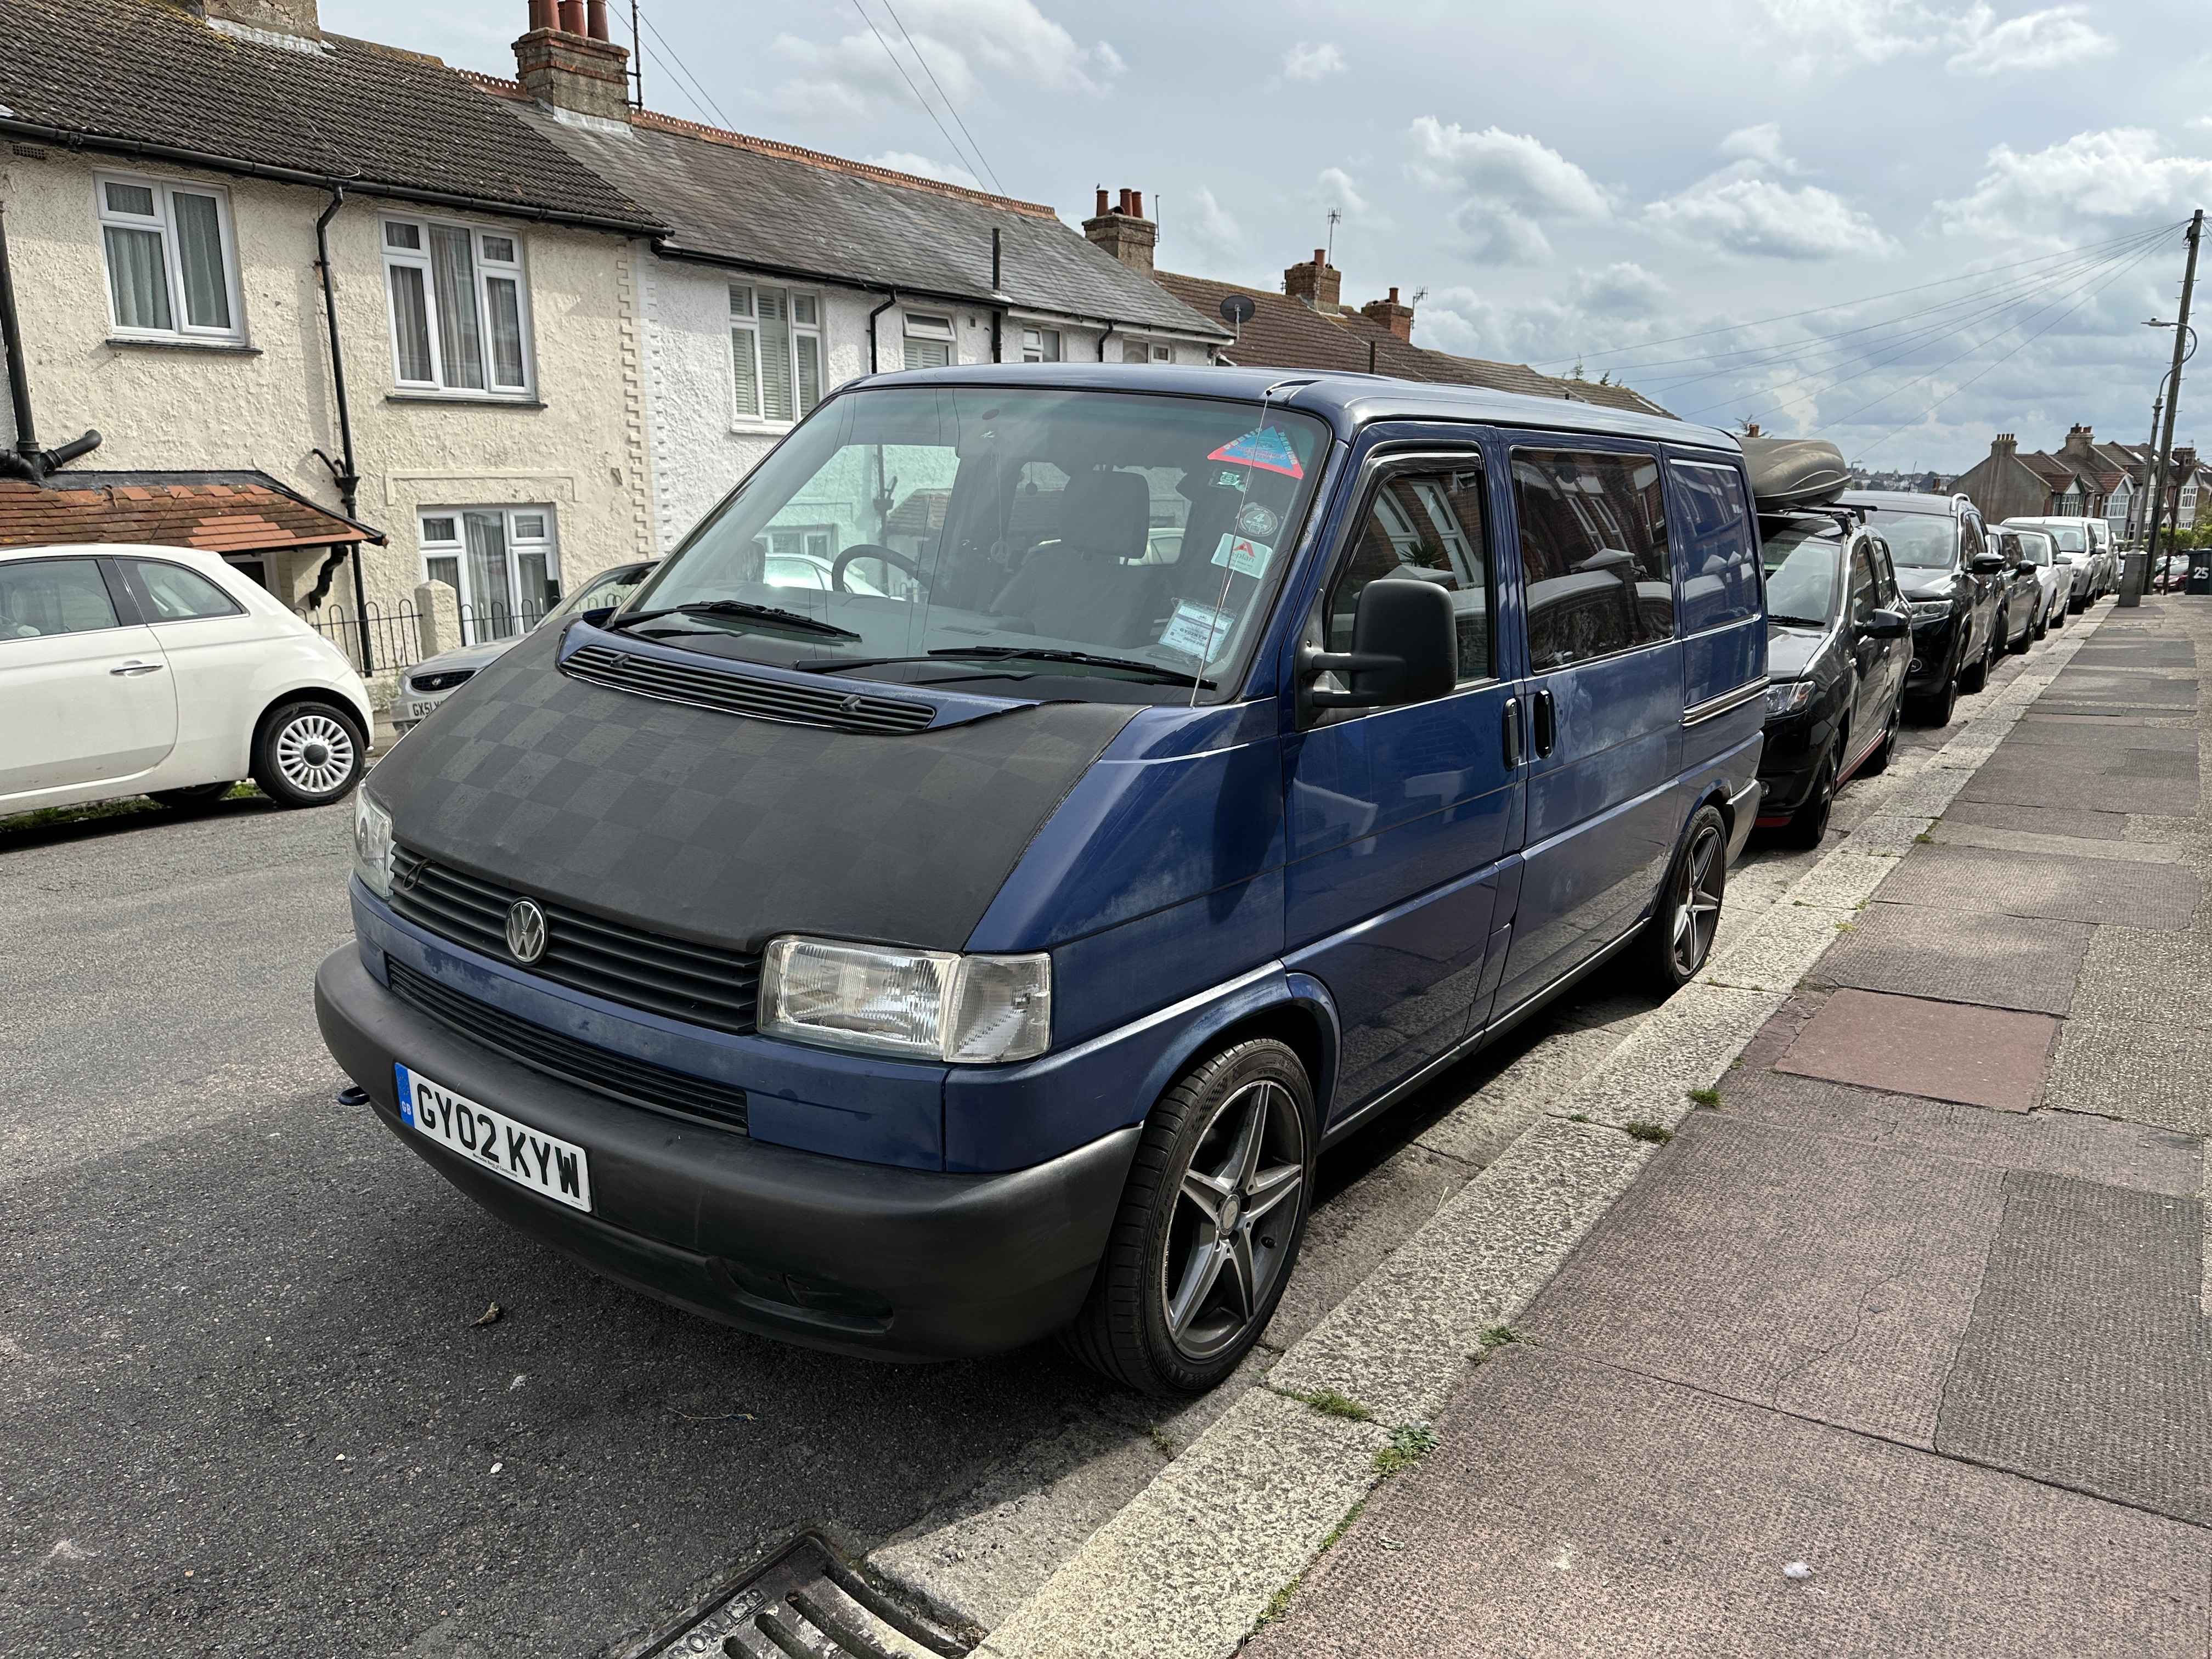 Photograph of GY02 KYW - a Blue Volkswagen Transporter camper van parked in Hollingdean by a non-resident. The sixth of eighteen photographs supplied by the residents of Hollingdean.